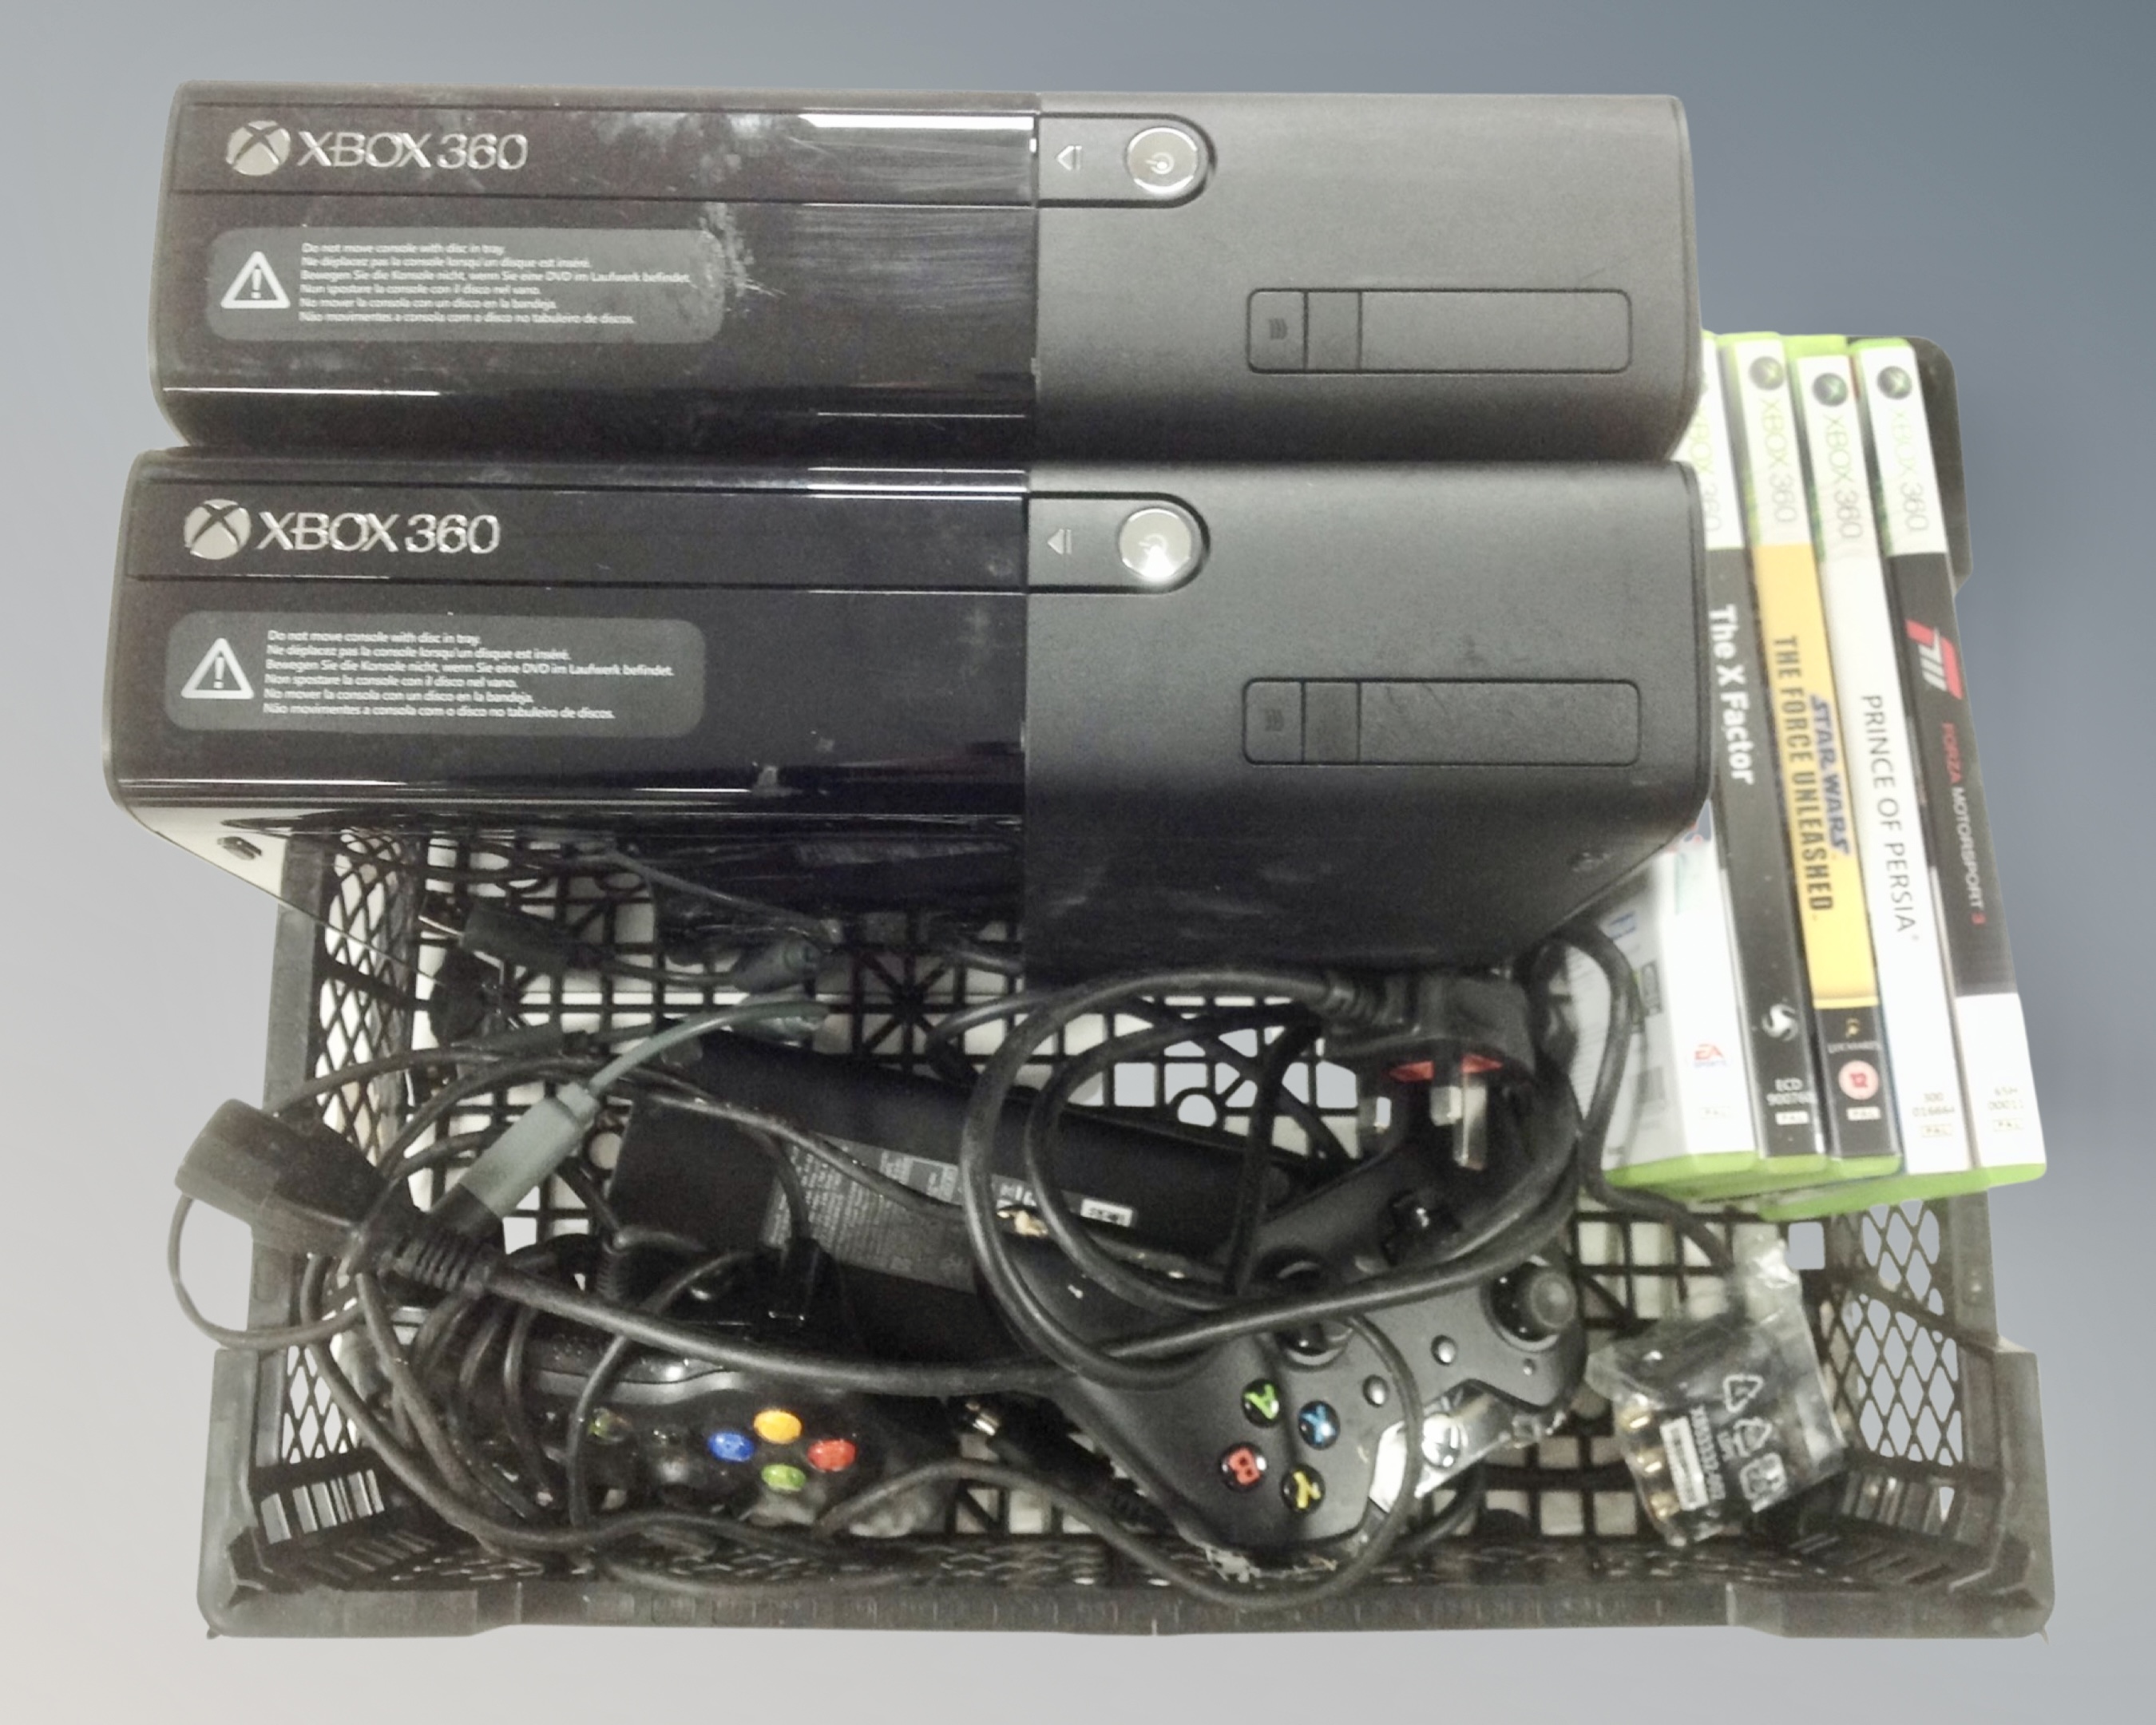 Two X-box 360 units with controllers and five games